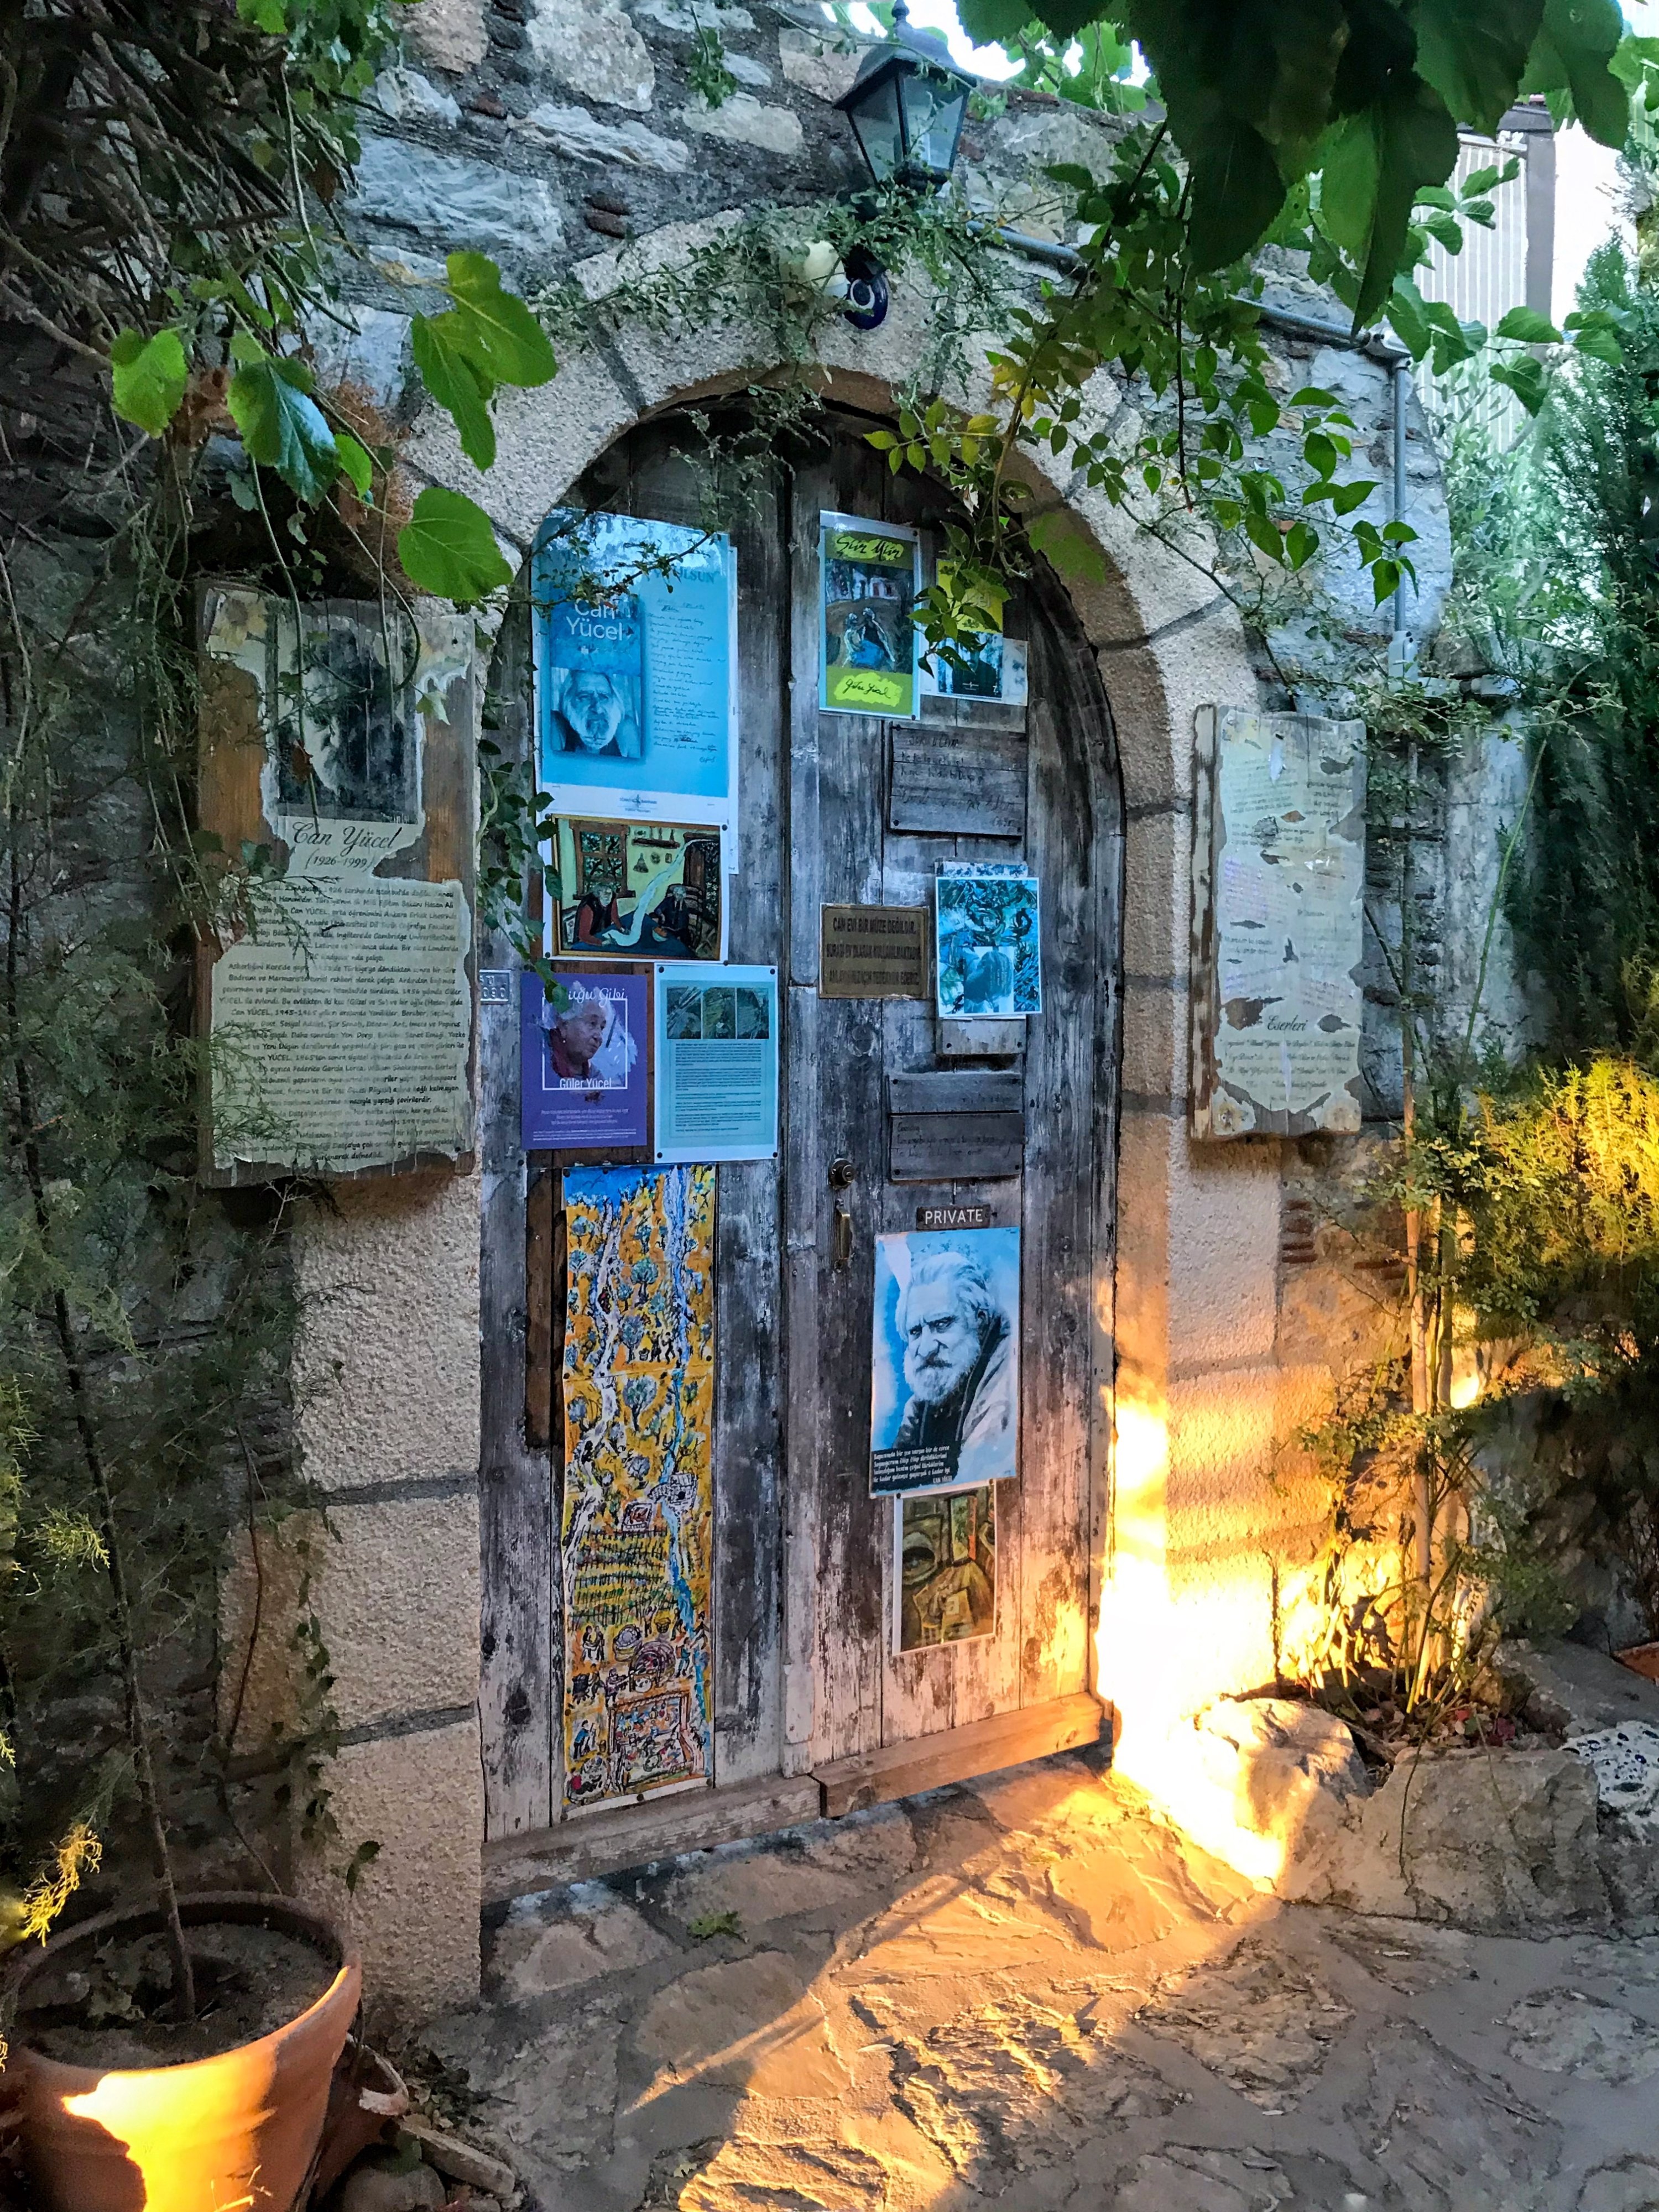 In Old Datça, you can visit the house of the famous poet Can Yücel, who once lived there. (Photo by Özge Şengelen)